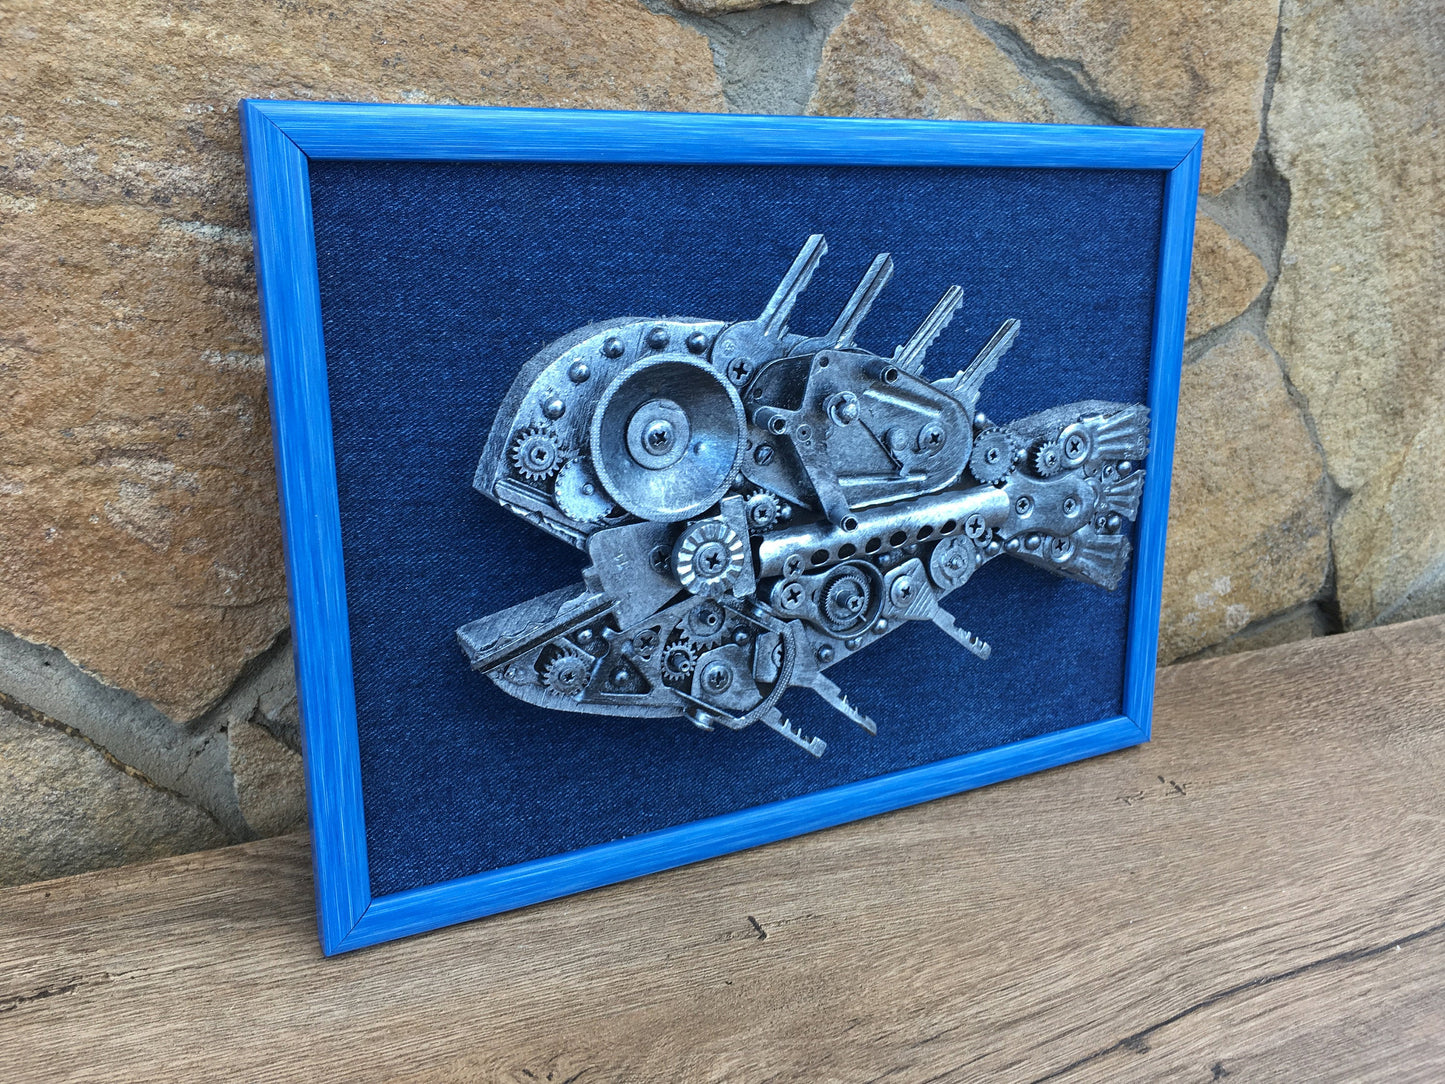 Steampunk painting, steampunk wall decor, steampunk wall hanging, steampunk wall art, steampunk wall sculpture, seahorse, chameleon, fish